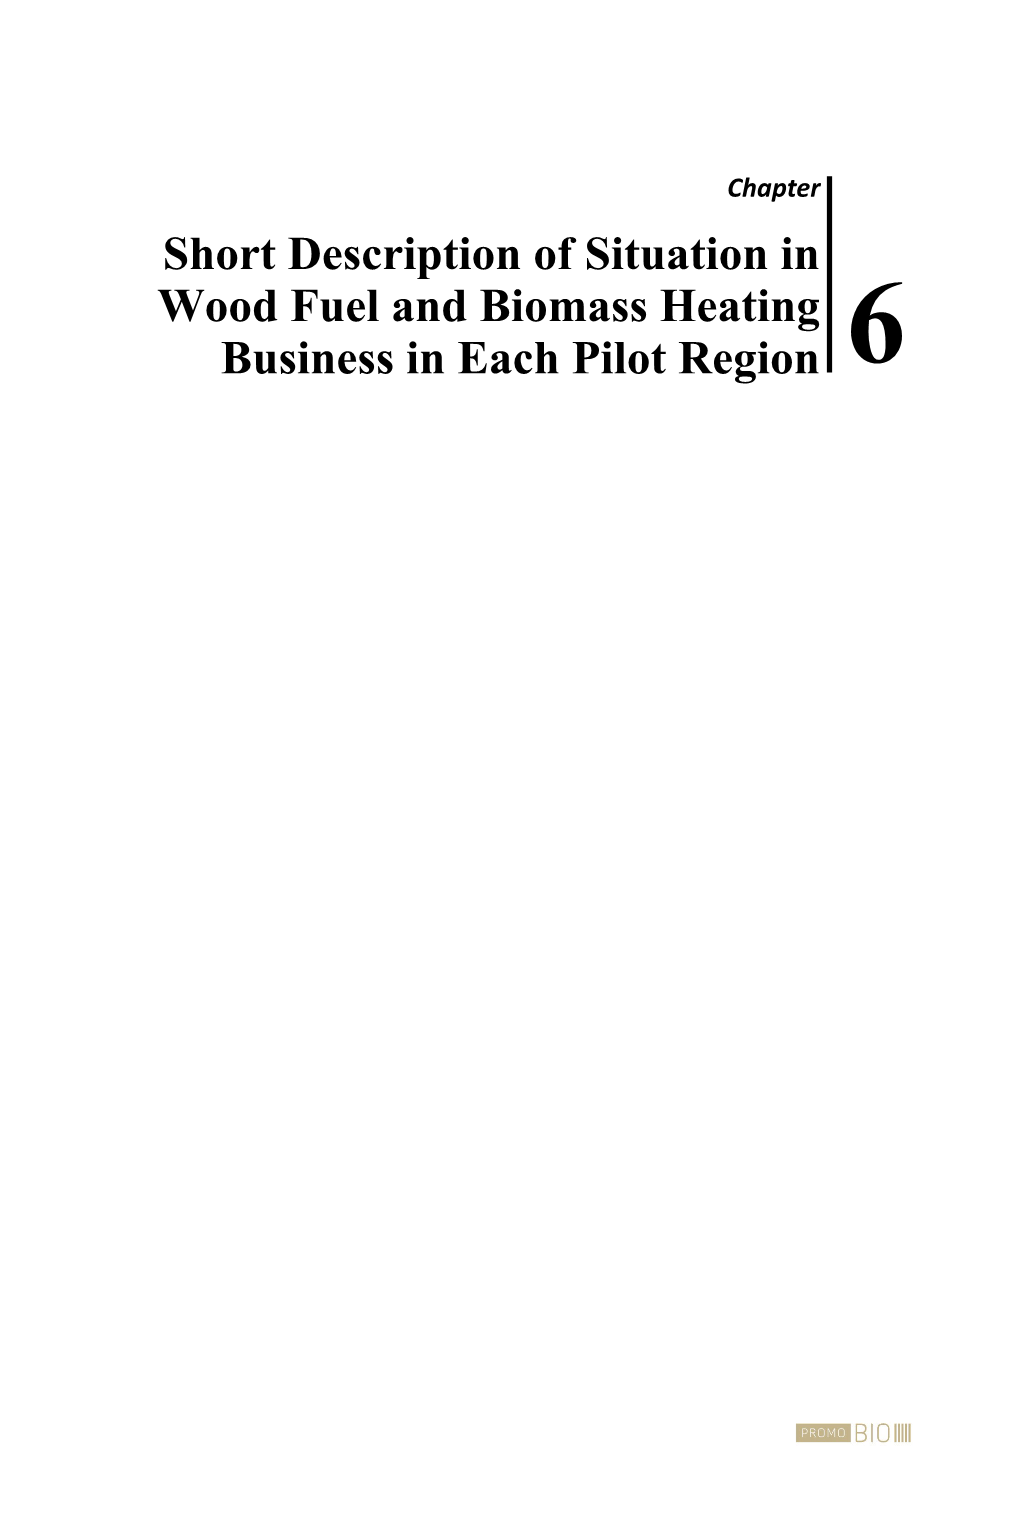 Short Description of Situation in Wood Fuel and Biomass Heating Business in Each Pilot Region 6